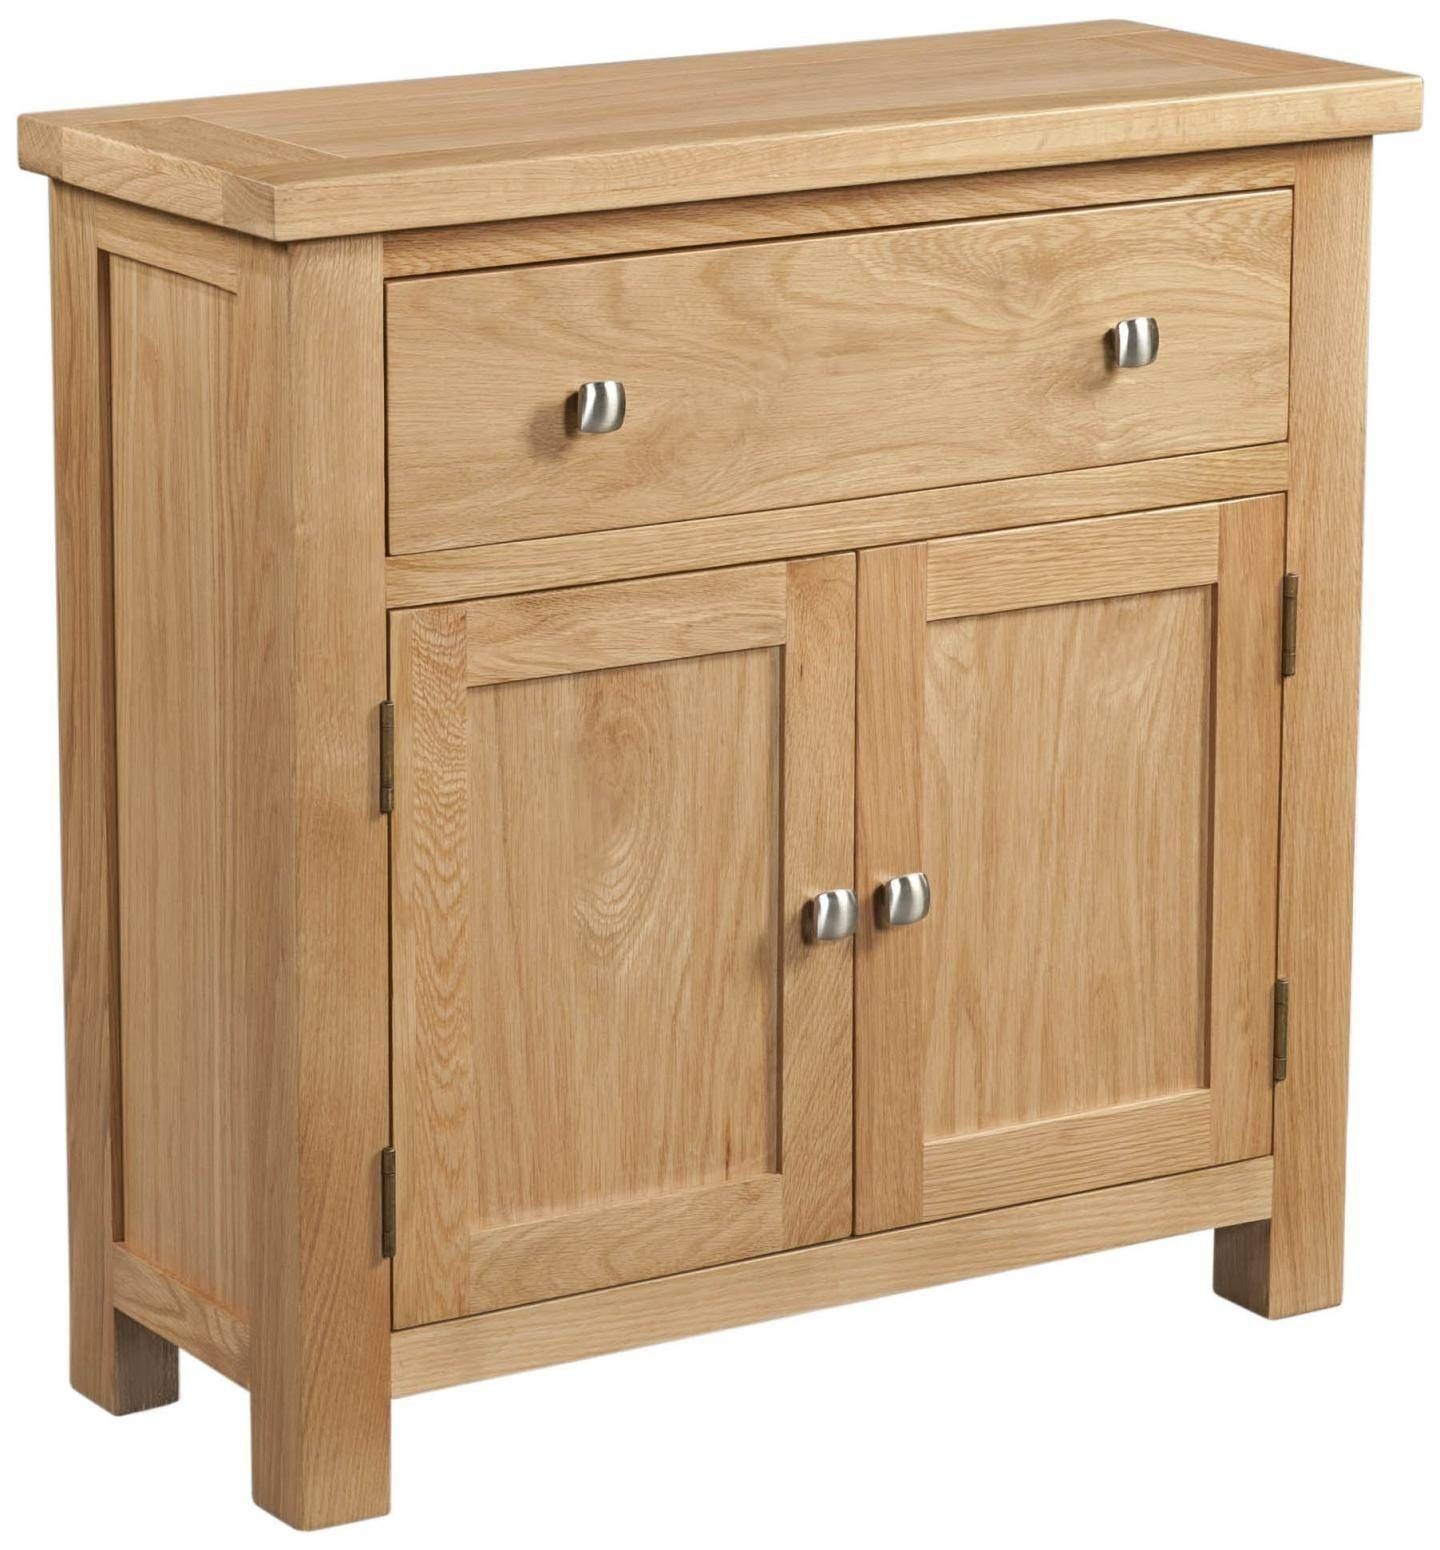 Lovely Pine & Oak Sideboards | Willoby's Furniture Swindon, Wiltshire With Small Sideboards (View 7 of 20)